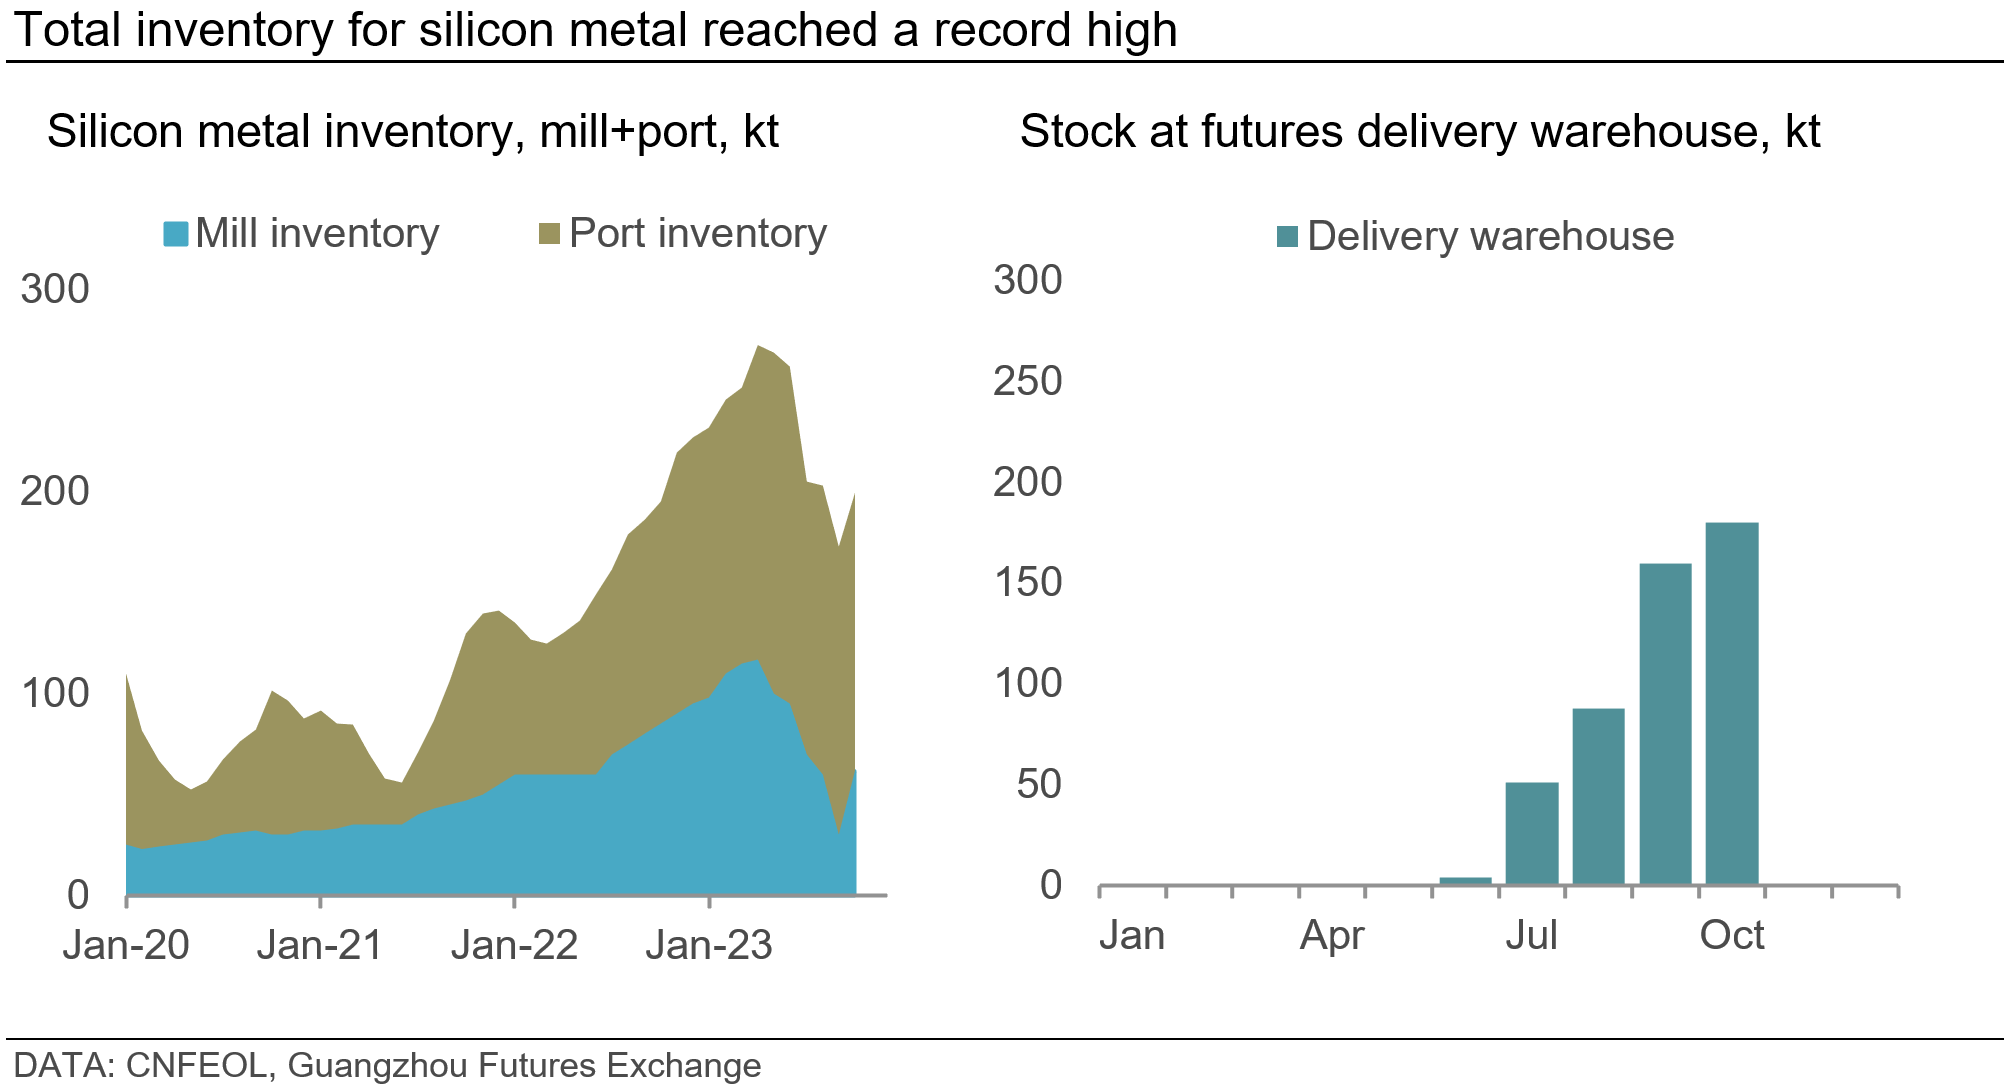 Graph about the total inventory for silicon metal